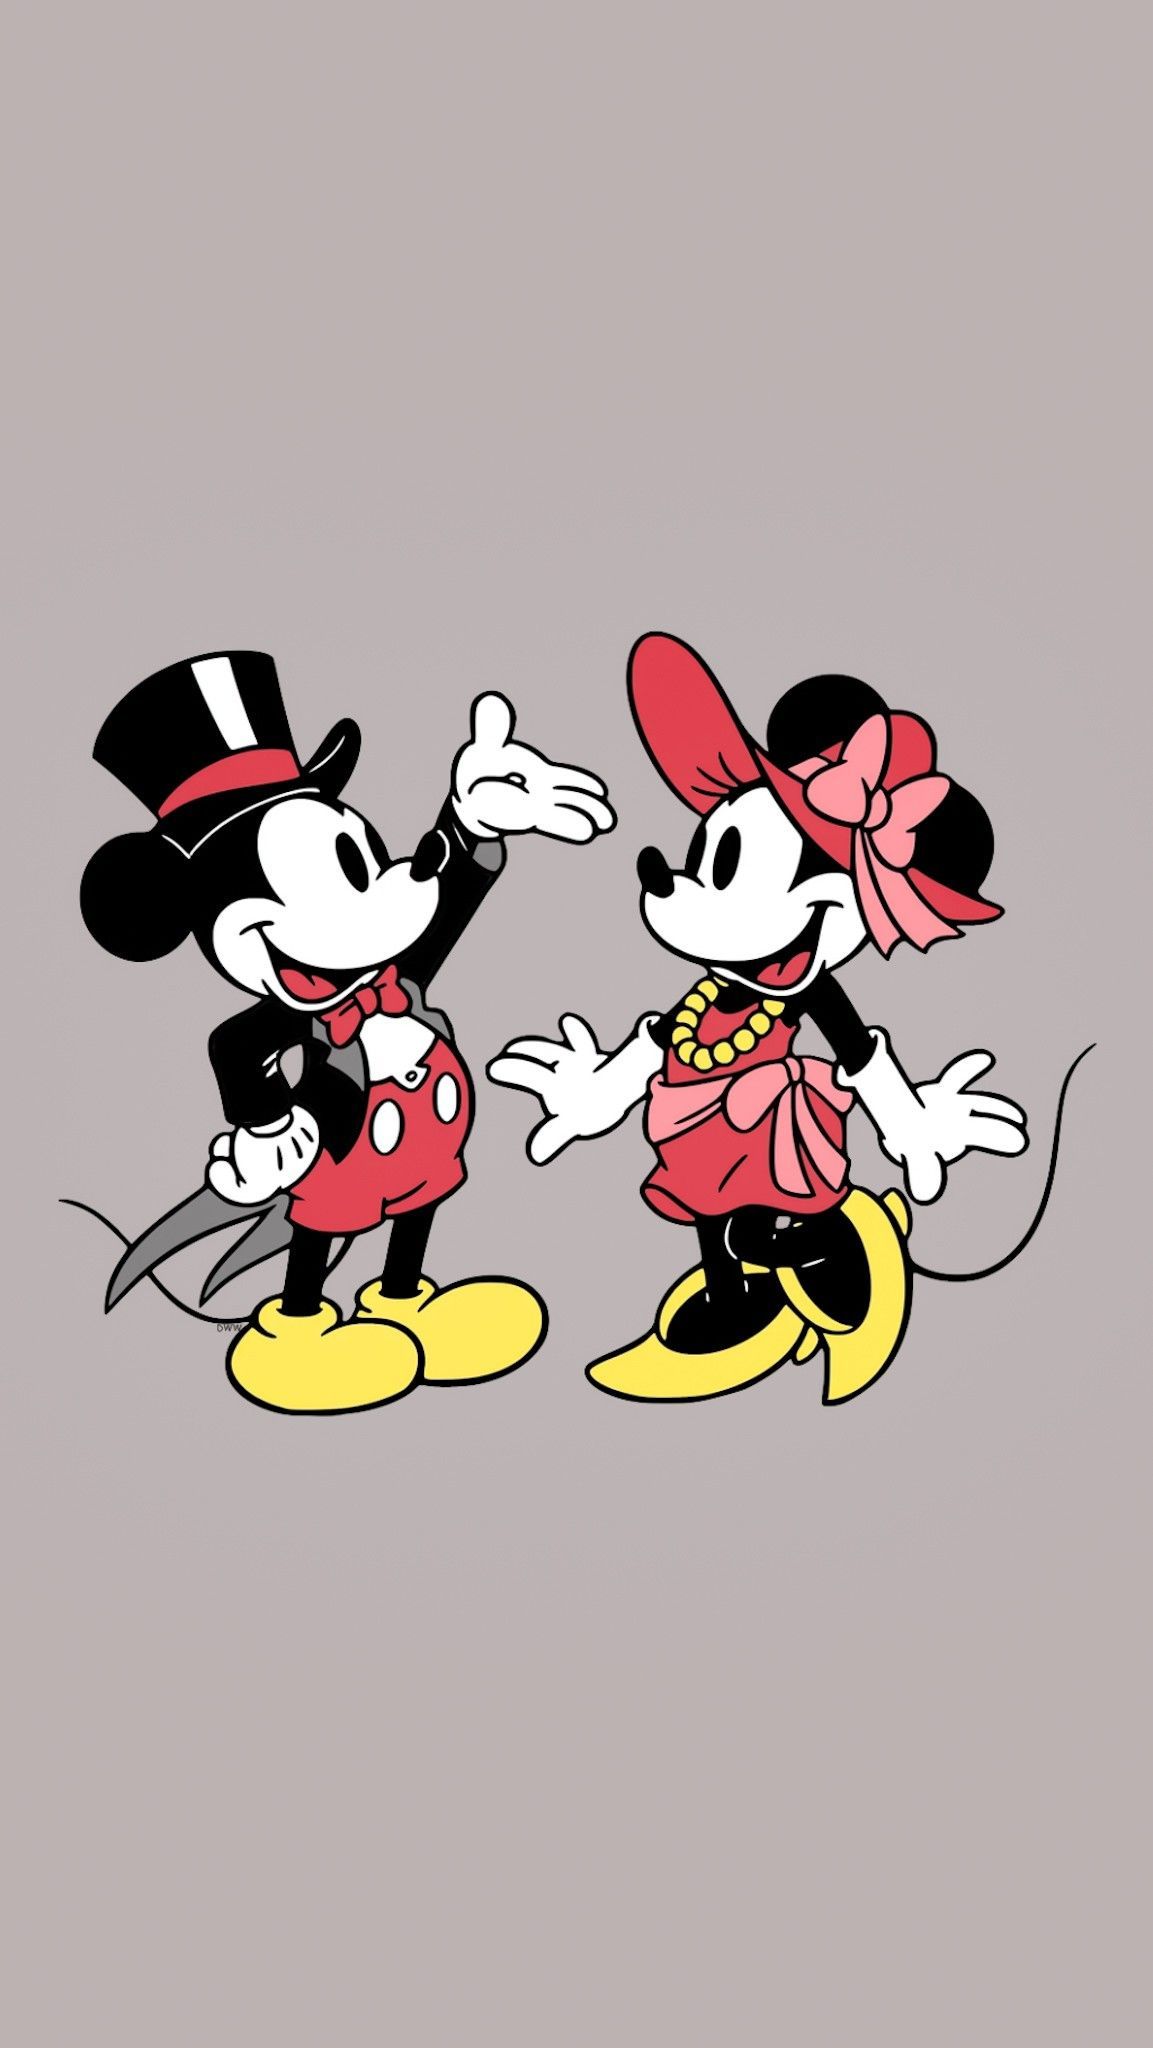 Mickey & Minnie Mouse BG. Mickey mouse and friends, Mickey and friends, Disney wallpaper